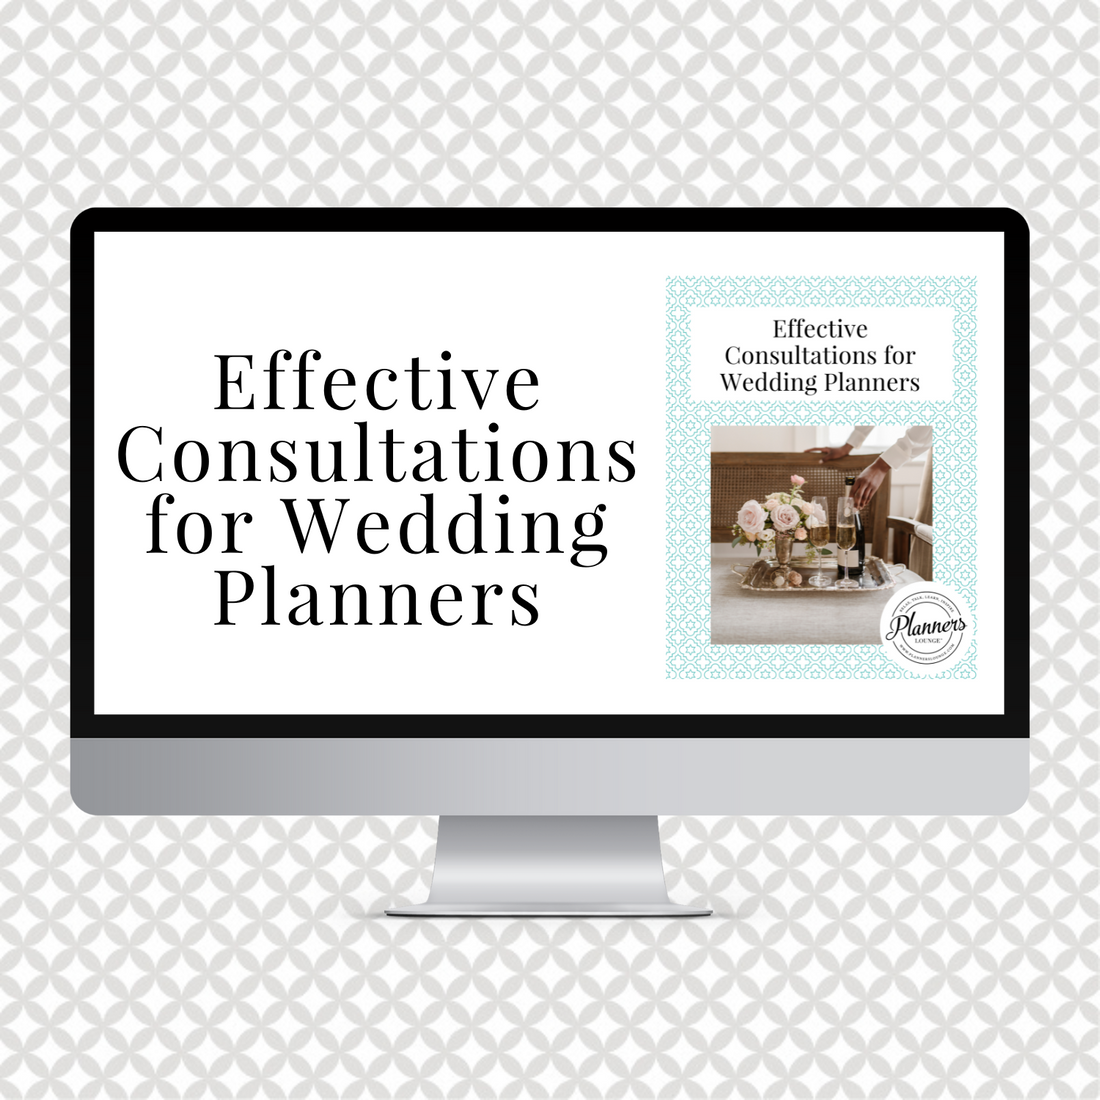 Effective Consultations for Wedding Planners